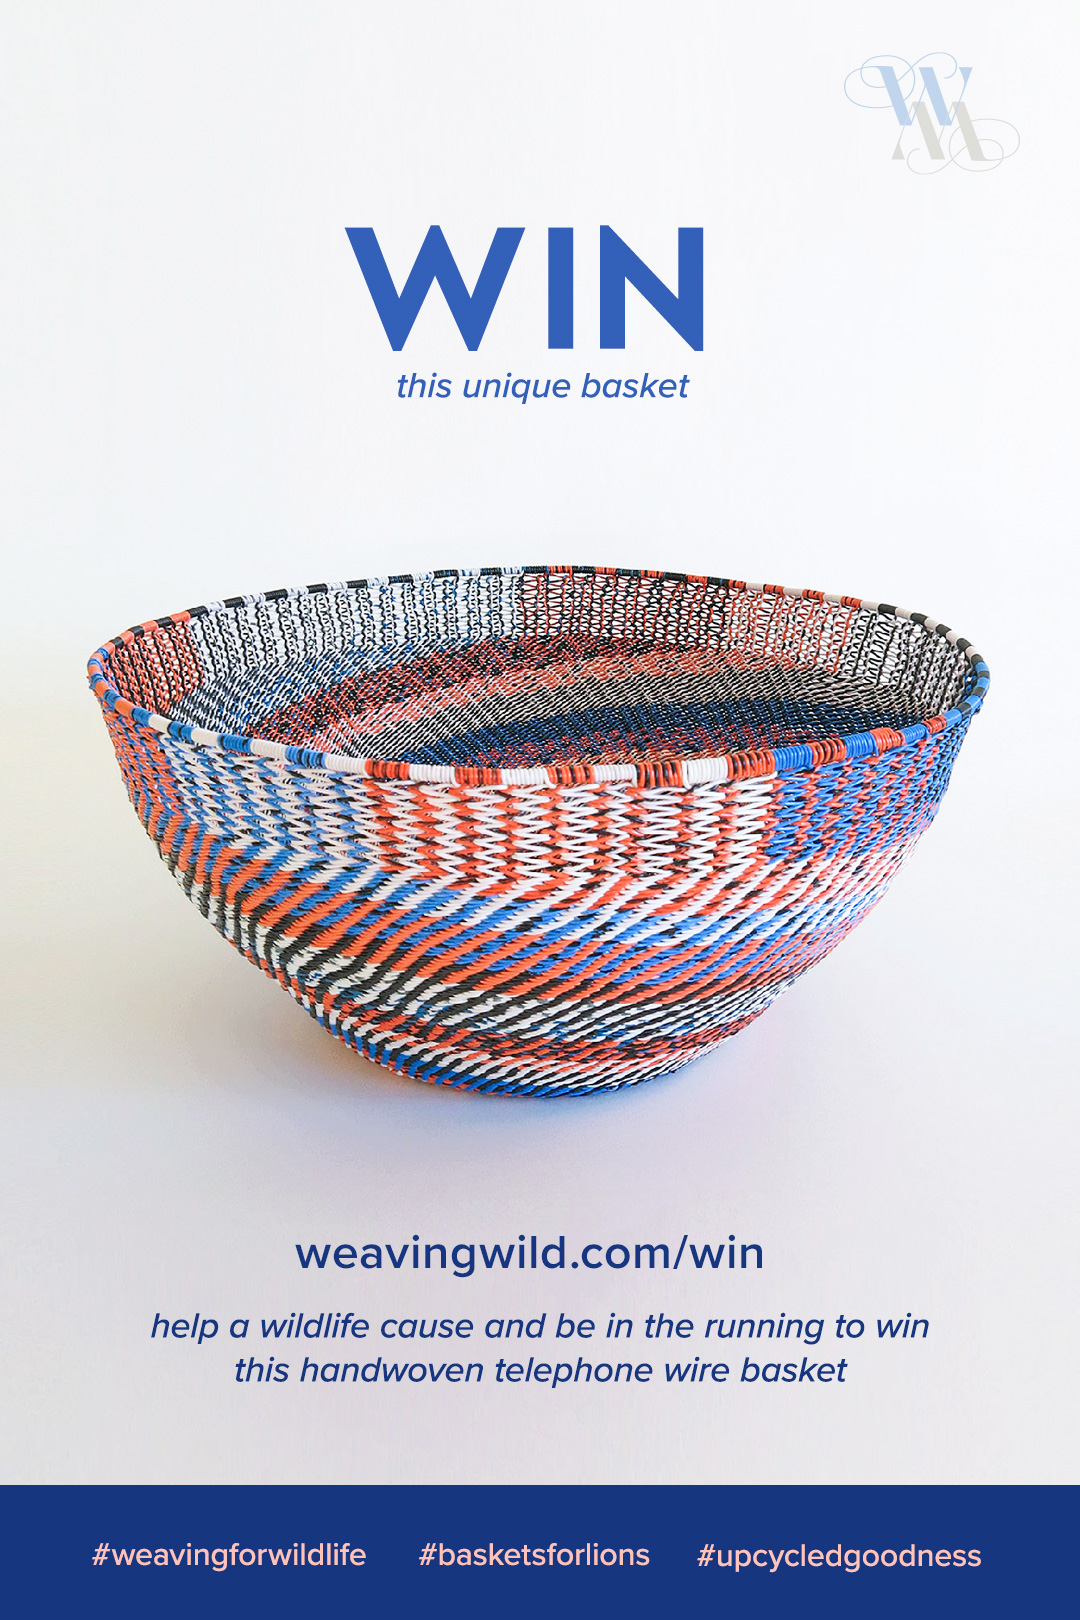 Pin this. Win this basket. Help a wildlife cause and be in the running to win this unique handwoven telephone wire basket.